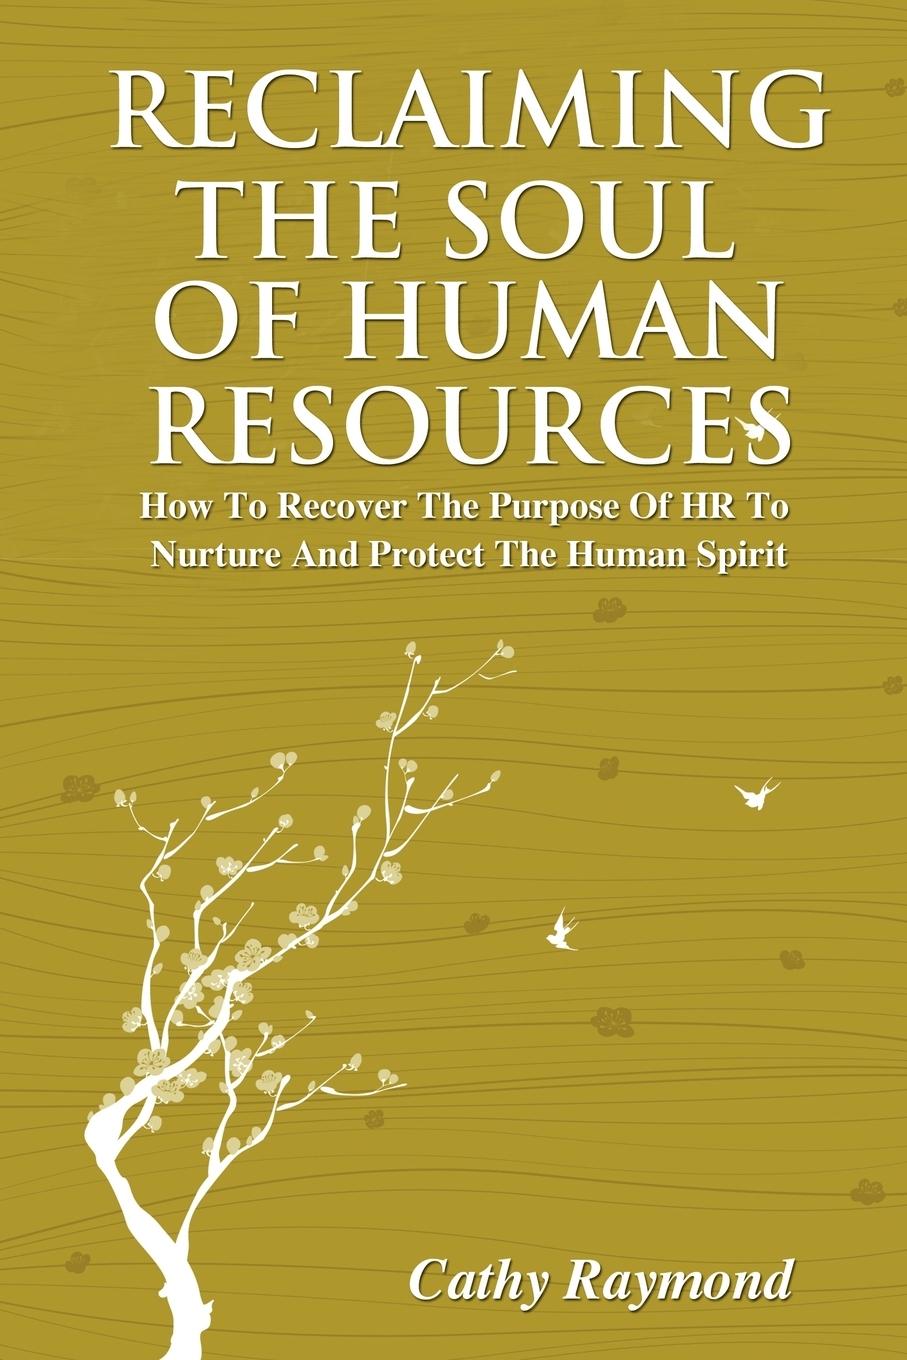 Reclaiming the Soul of Human Resources